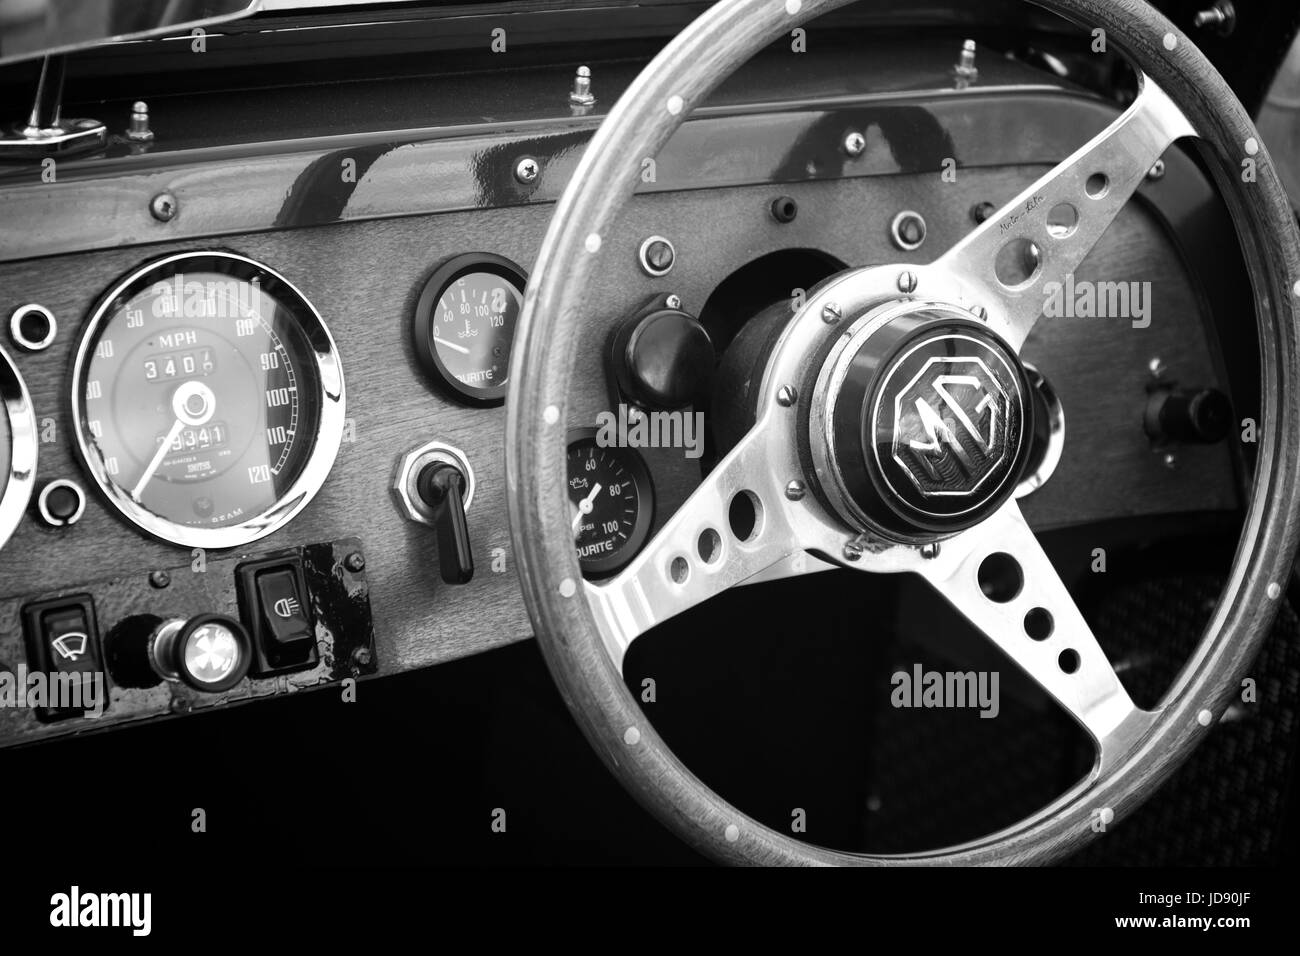 Inside the drivers cockpit of an old classic vintage MG sports car showing dials, guages, instruments and steering wheel. Stock Photo